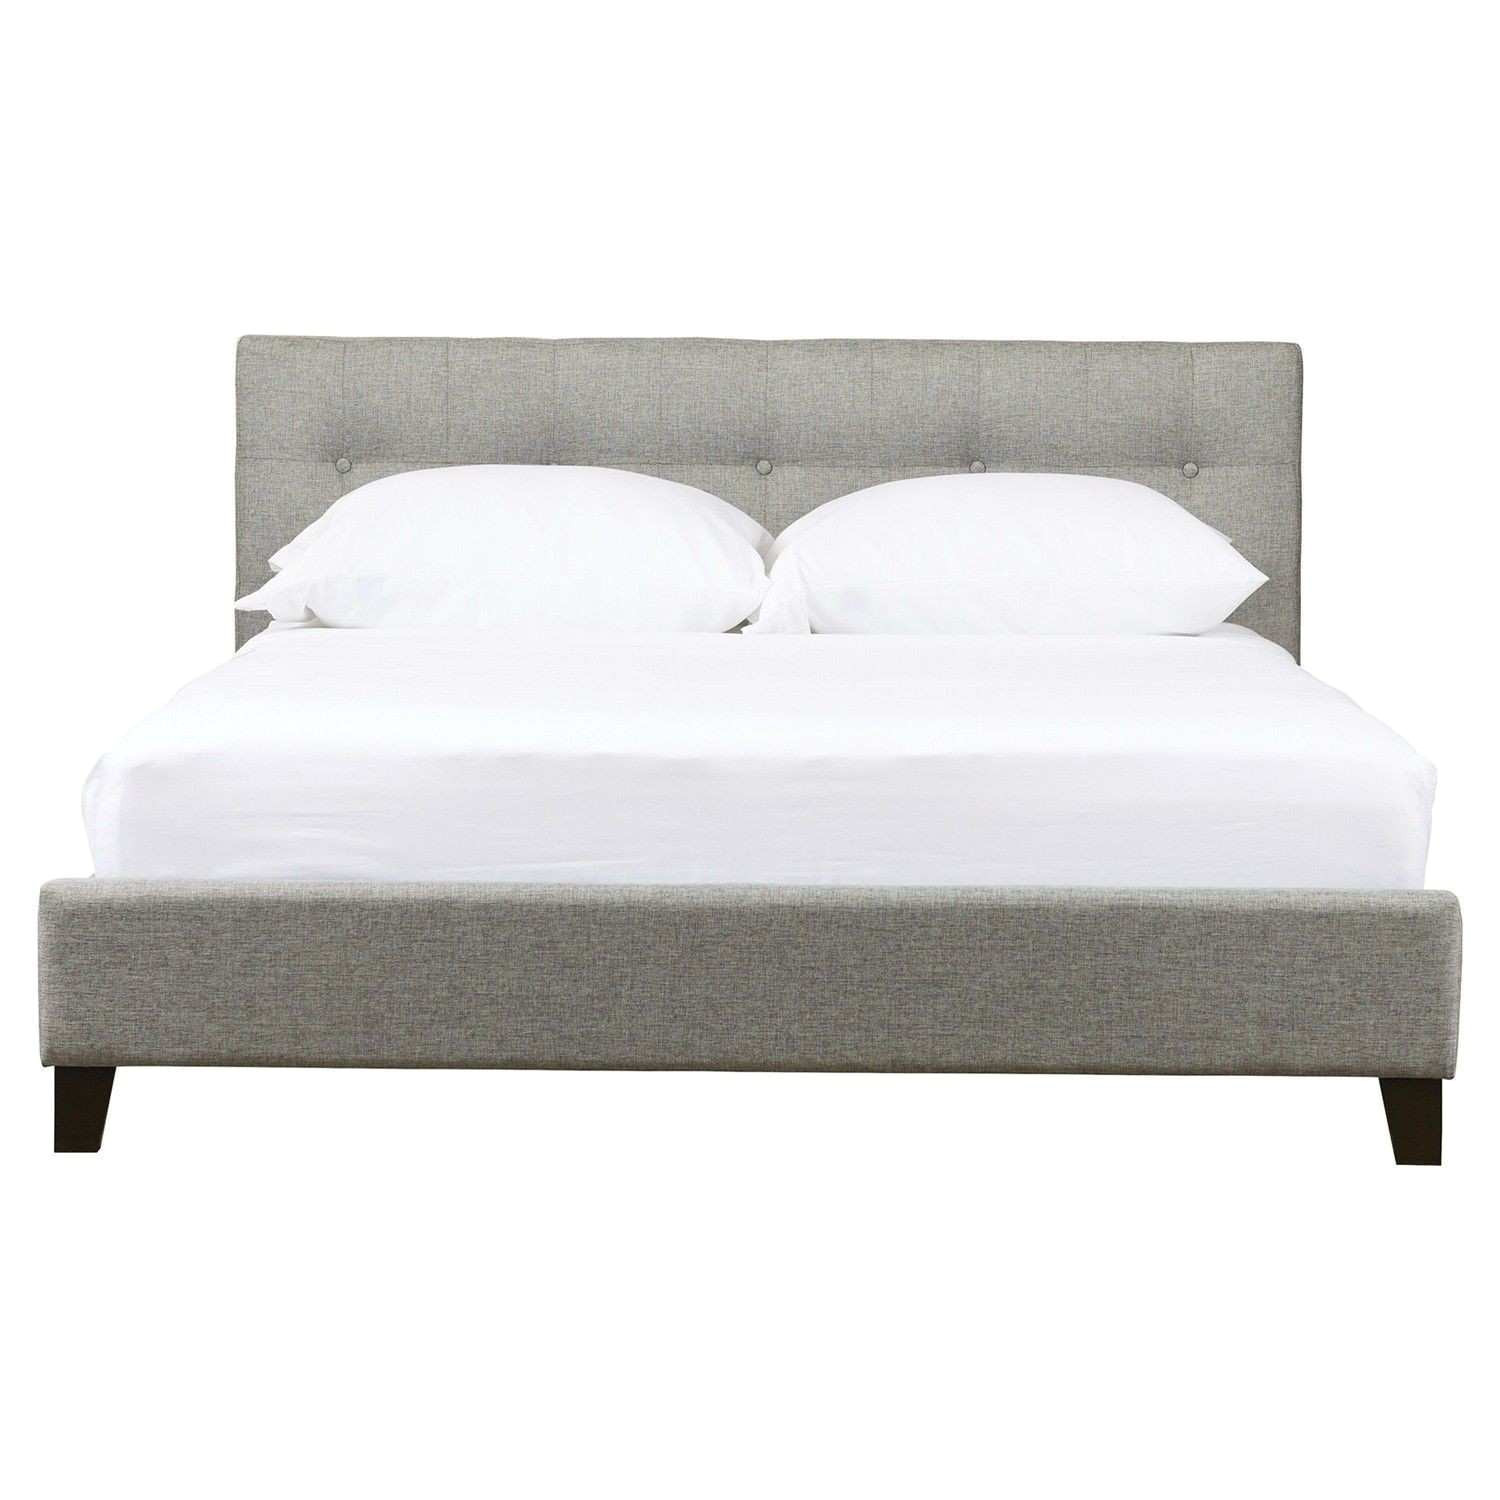 bed frame with headboard storage luxury headboards platform bed without headboard lovely queen storage bed